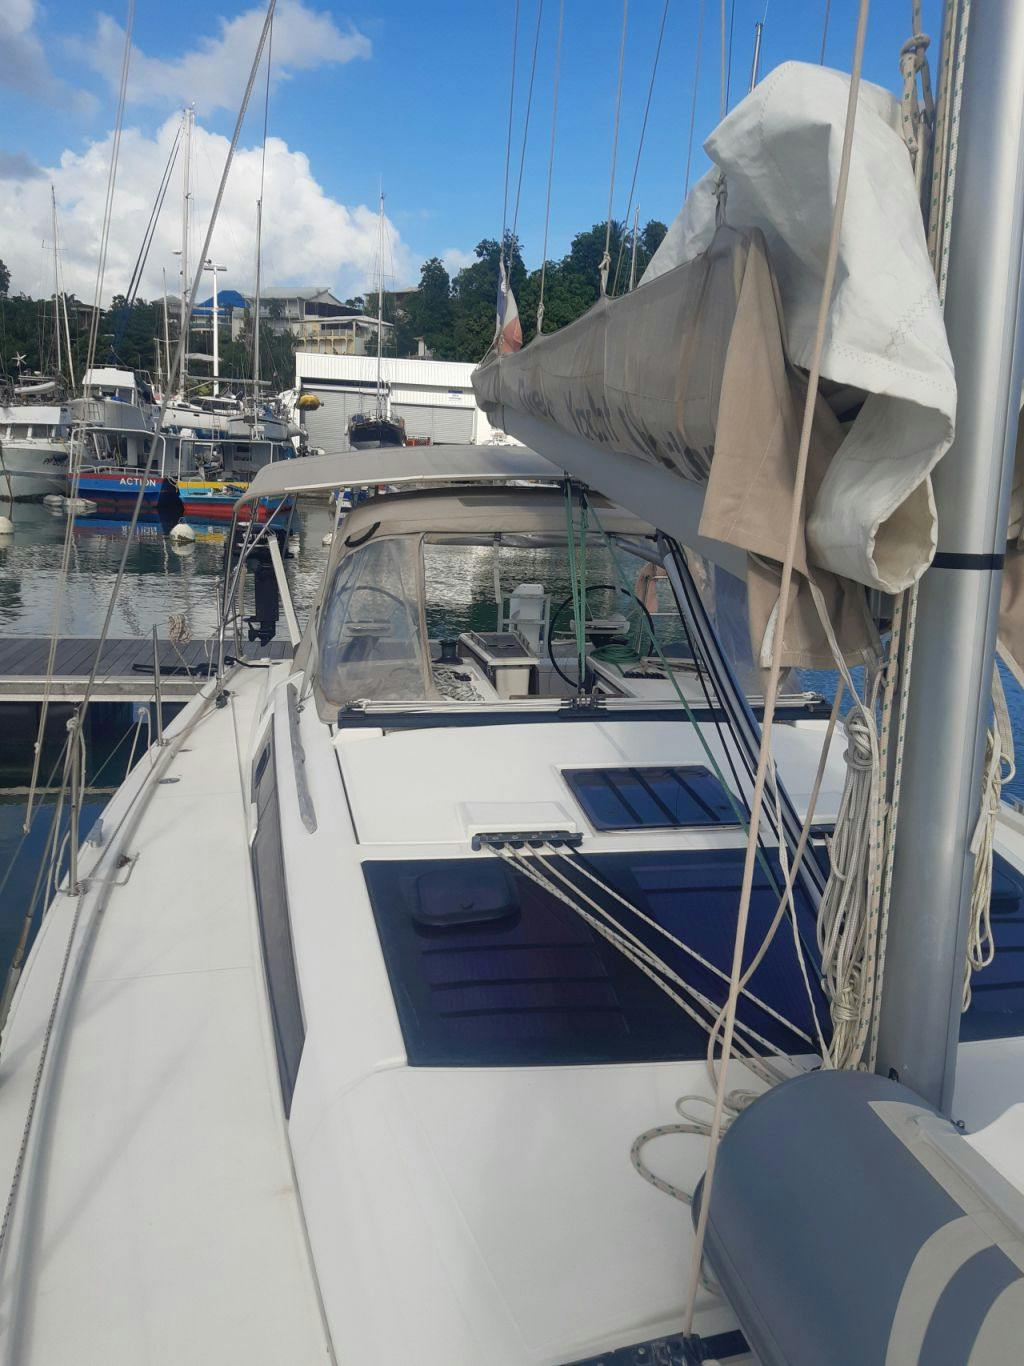 Book Dufour 390 GL Sailing yacht for bareboat charter in Guadeloupe, La Marina Bas du Fort, Guadeloupe, Caribbean with TripYacht!, picture 4